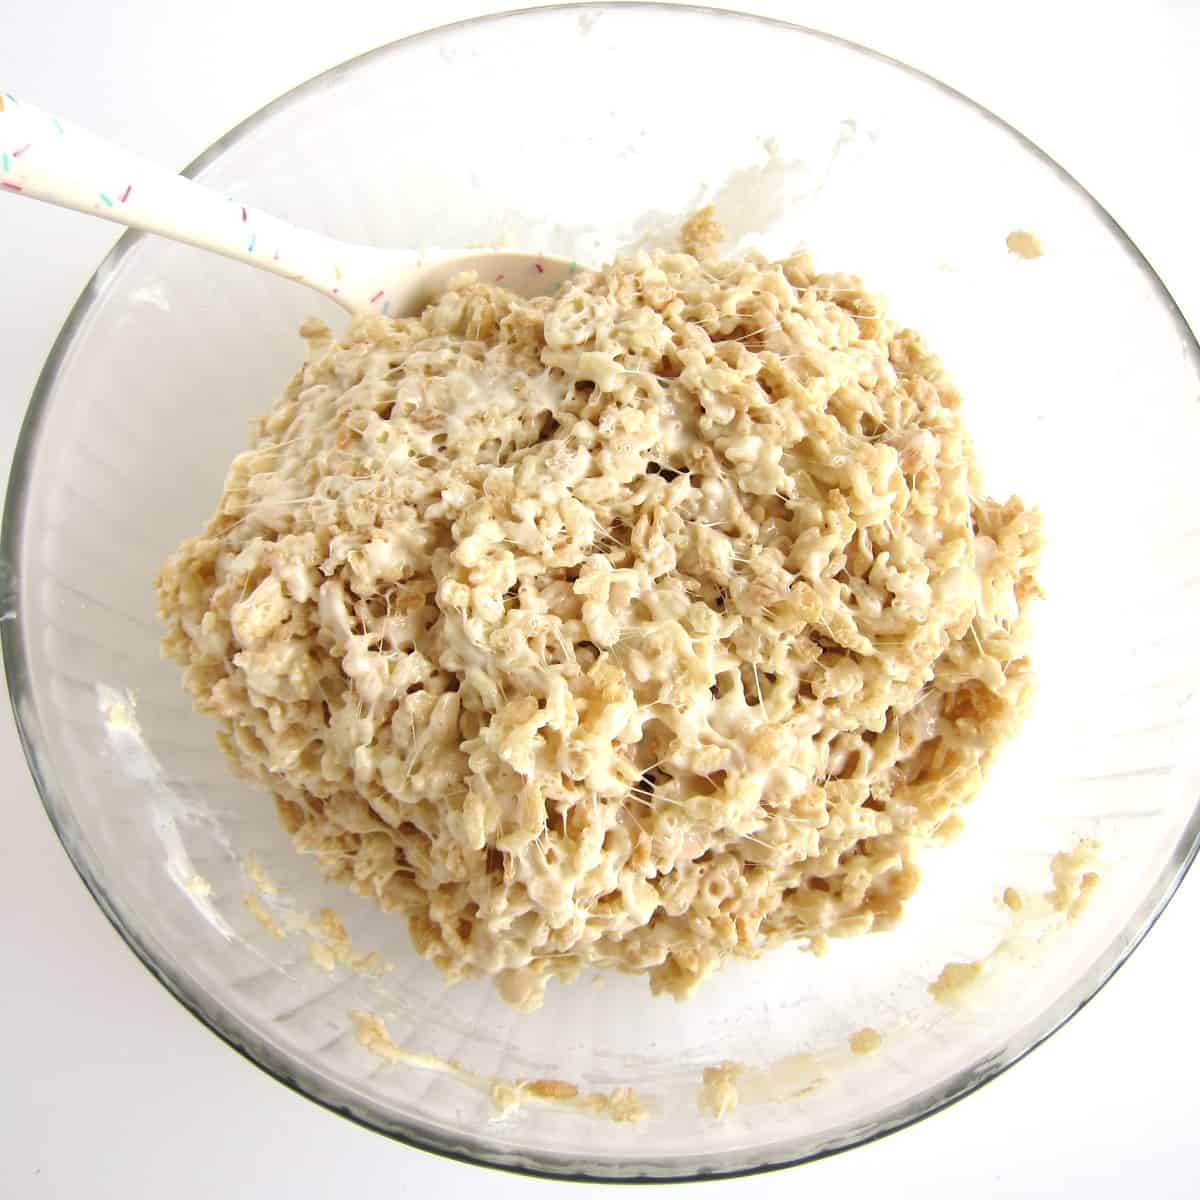 Rice Krispie Treat mixture in a mixing bowl.